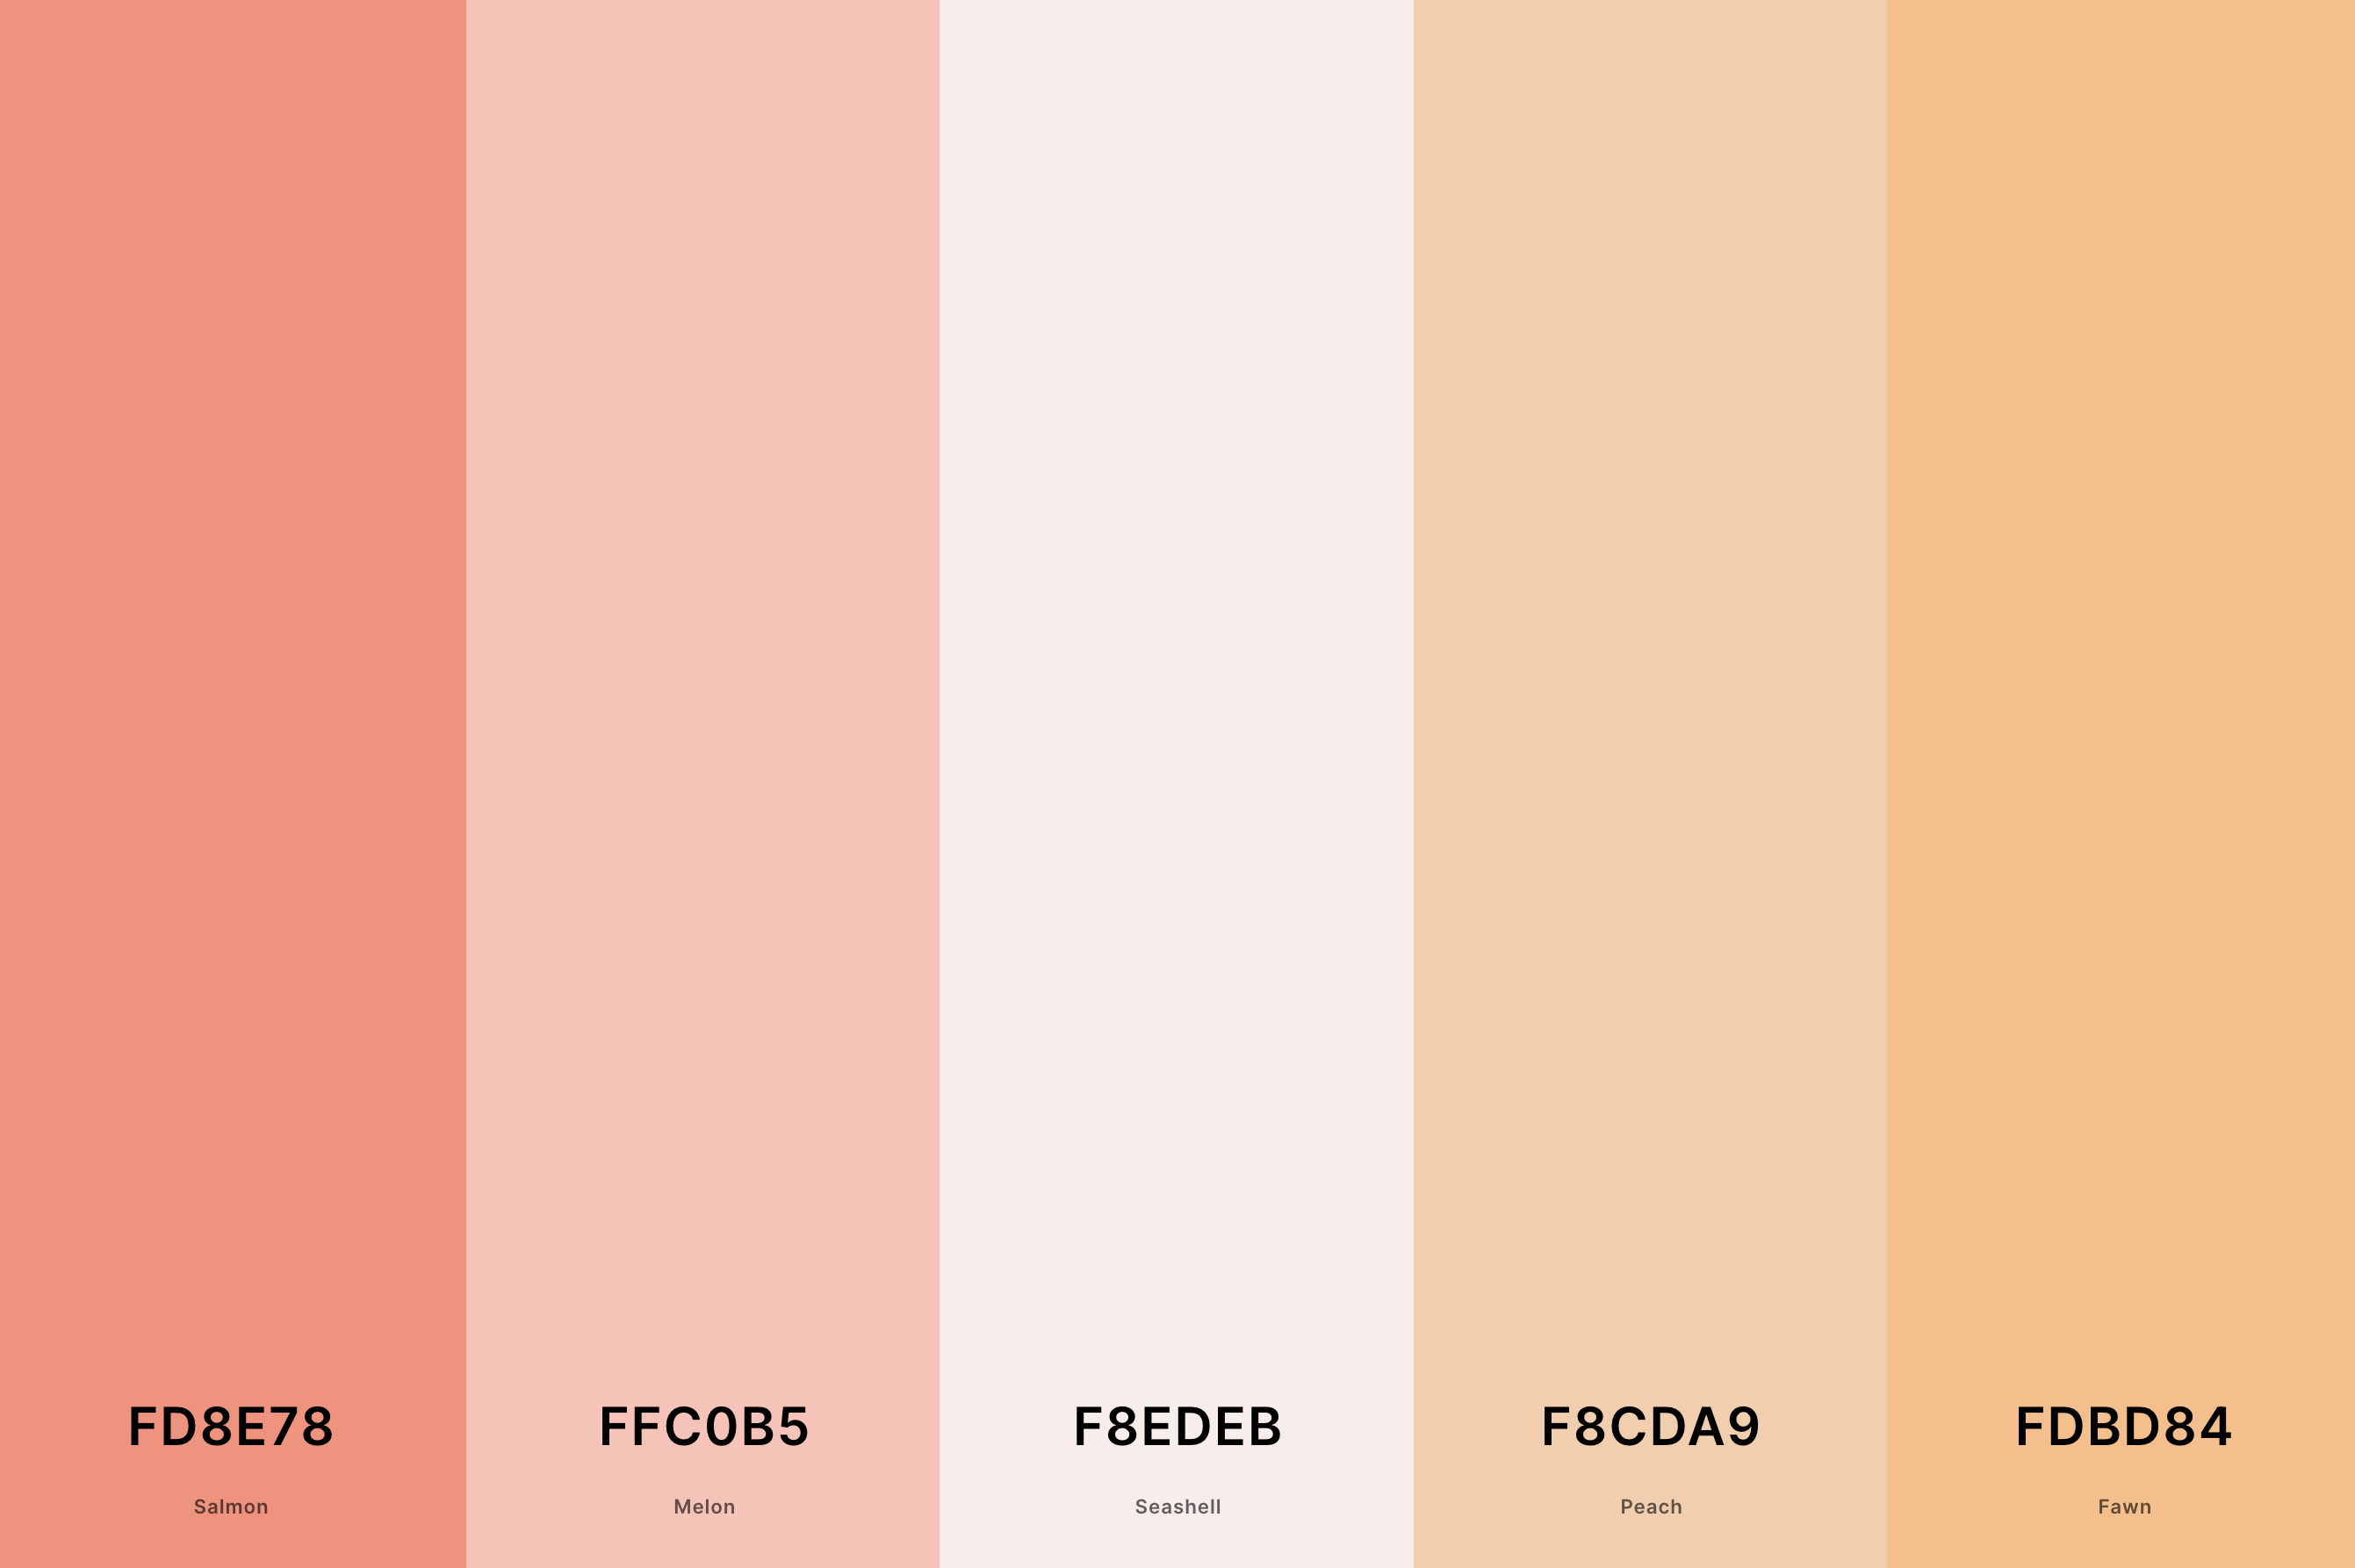 8. Aesthetic Cute Color Palette Color Palette with Salmon (Hex #FD8E78) + Melon (Hex #FFC0B5) + Seashell (Hex #F8EDEB) + Peach (Hex #F8CDA9) + Fawn (Hex #FDBD84) Color Palette with Hex Codes